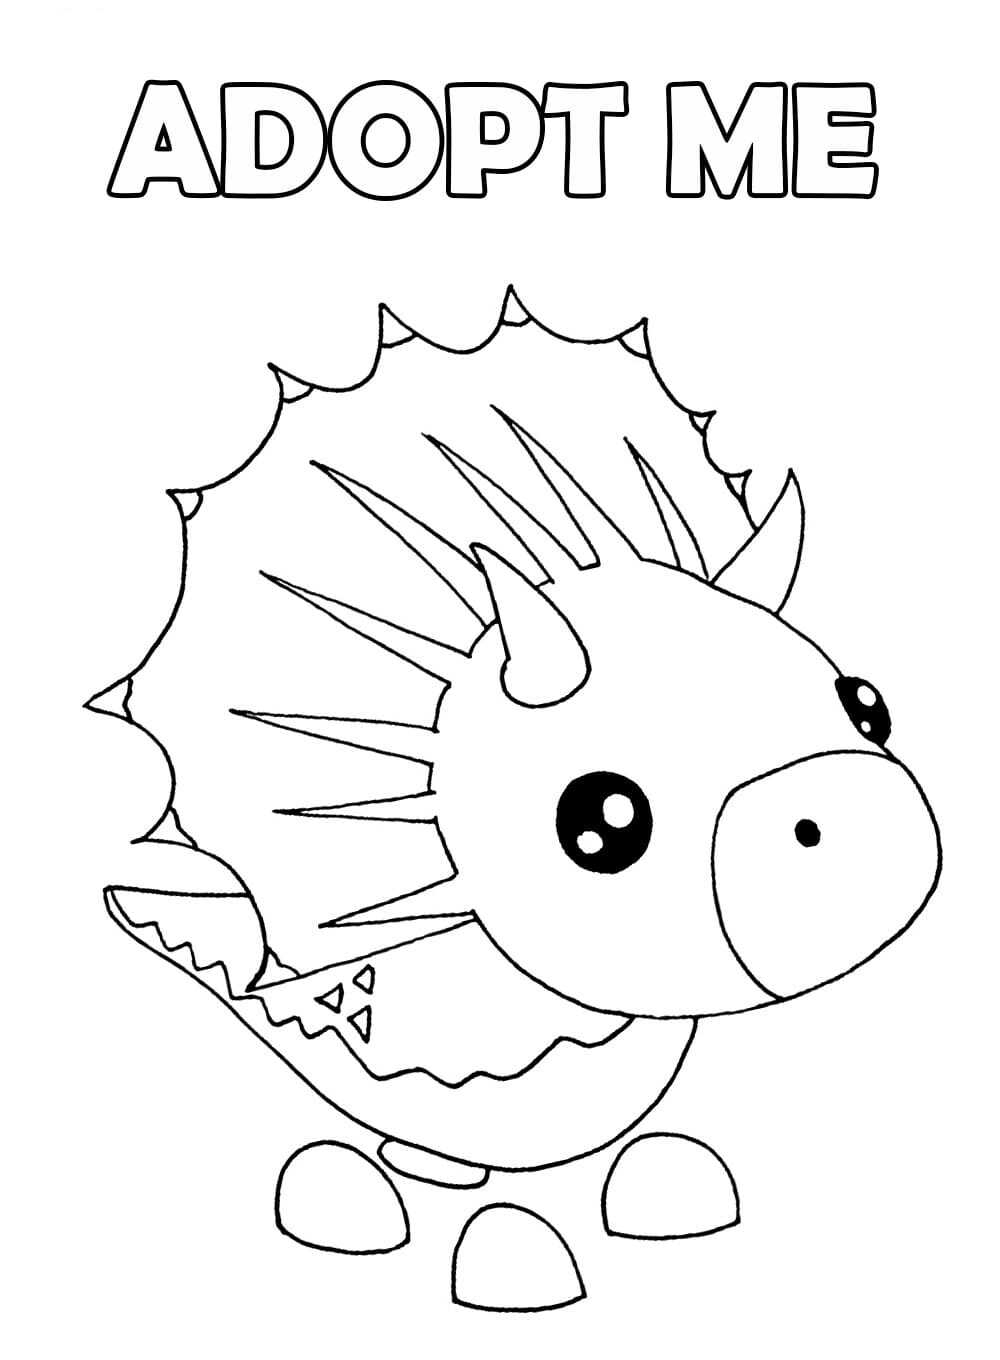 The Triceratops Features Dinosaur Pet With Three White Horns On Its Head And Snout In Adopt Me Video Games Coloring Pages Adopt Me Coloring Pages Coloring Pages For Kids And Adults - white horns roblox